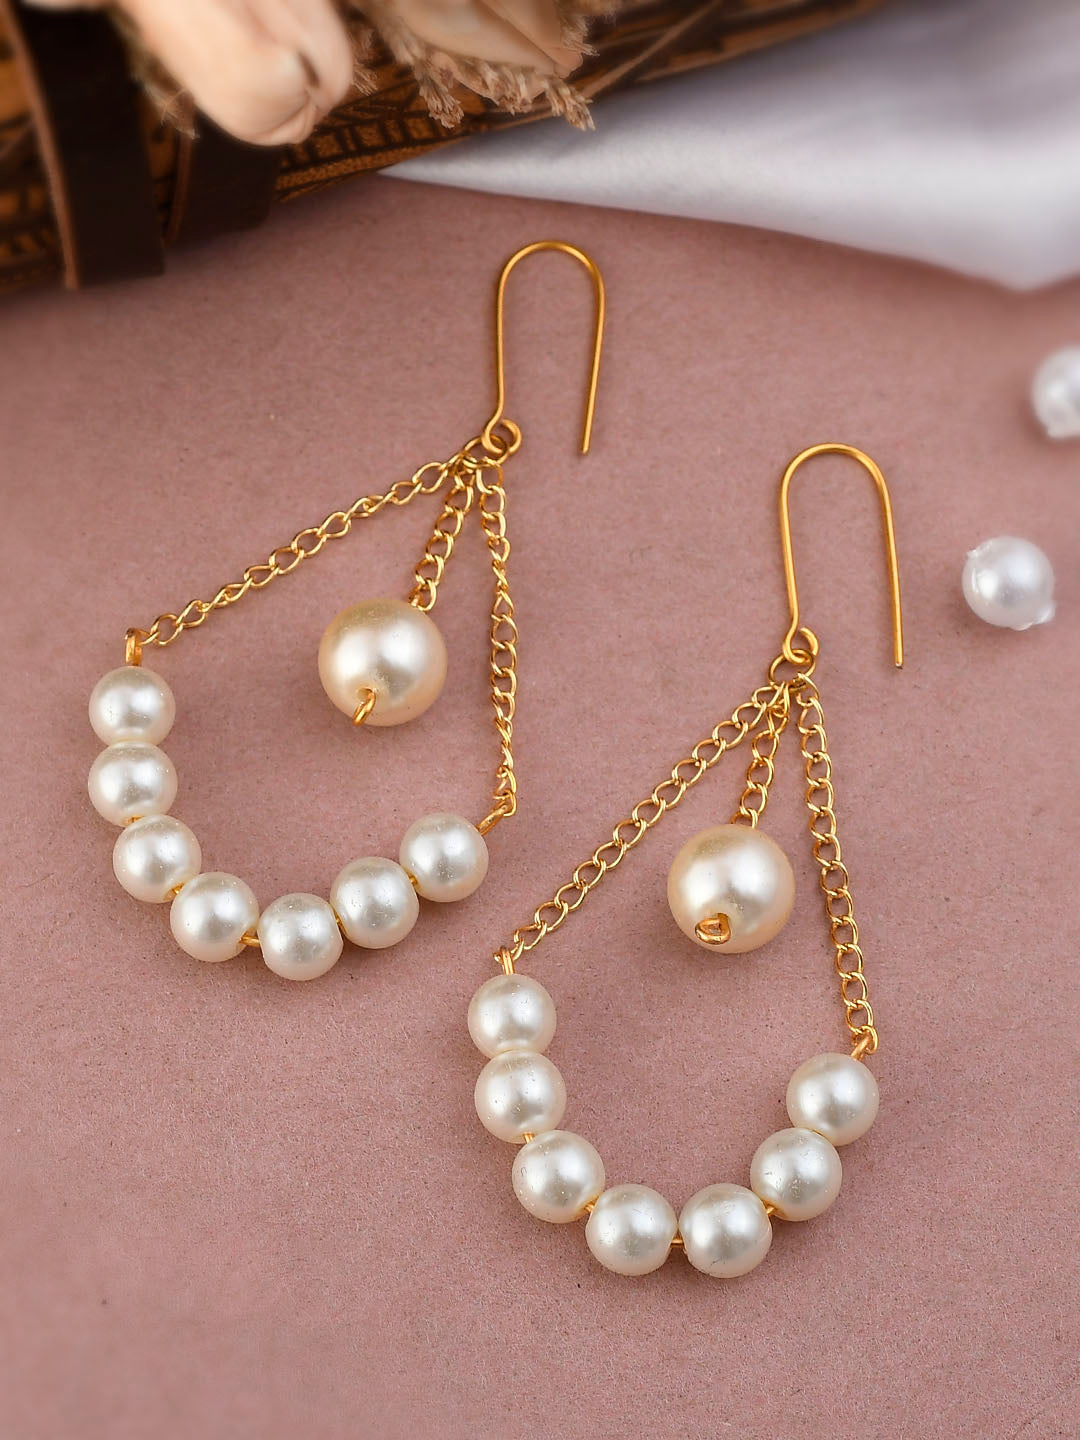 Afghan Gold Silver Color Alloy Big Earrings for Women Crystal Pearls Beads  Earrings & Rings Sets Adjustable Indian Party Jewelry